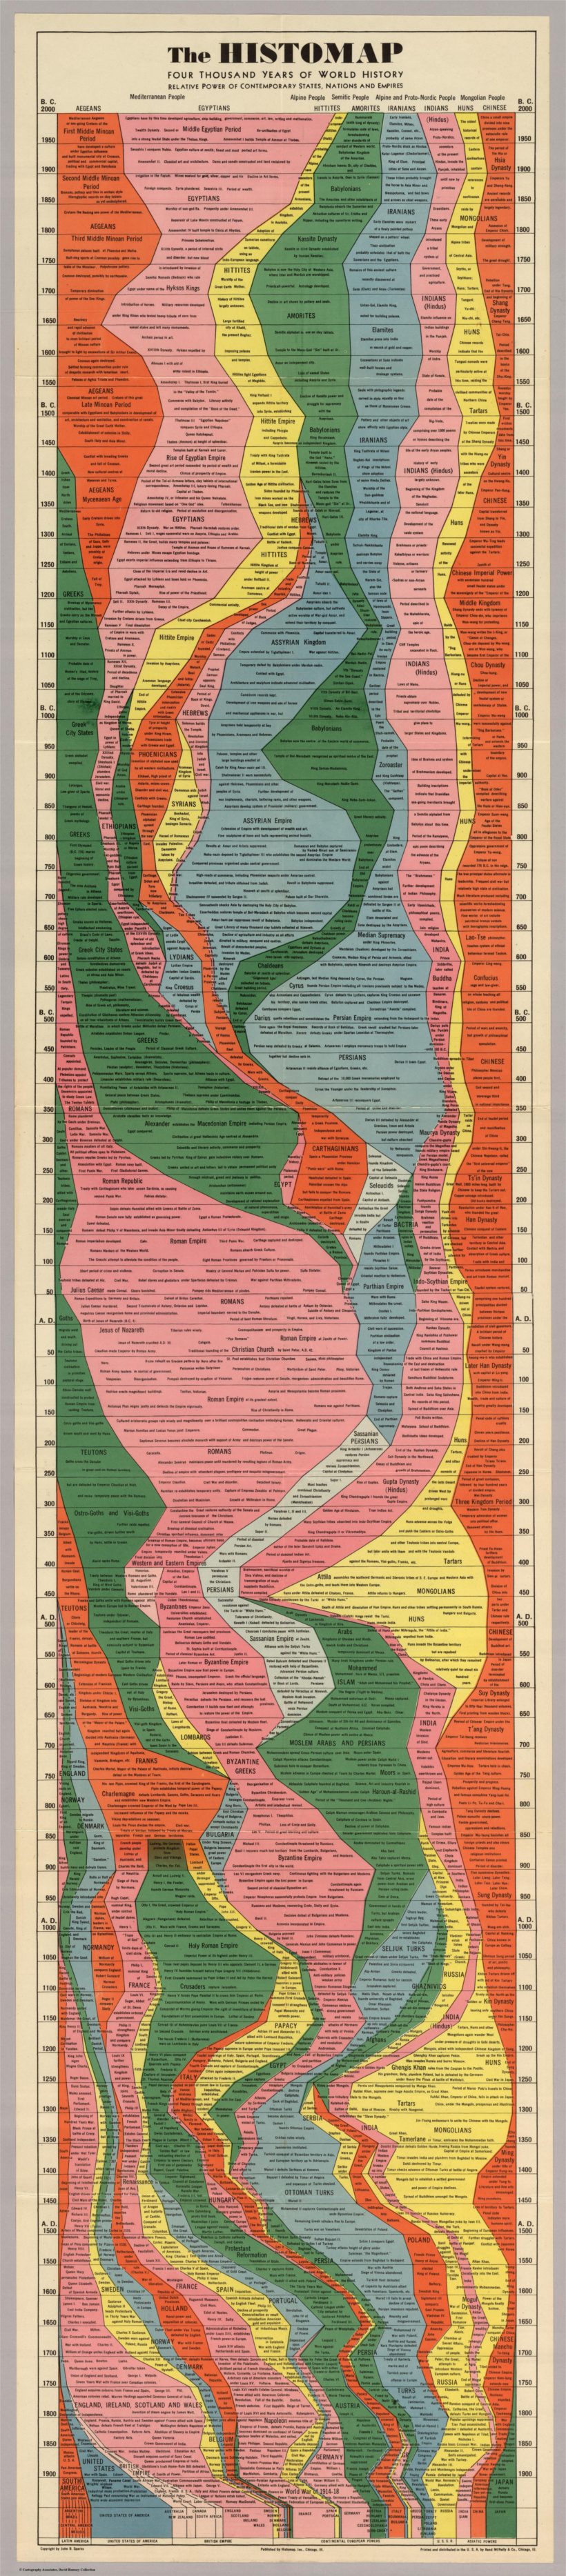 Histomap: Visualizing the 4,000 Year History of Global Power